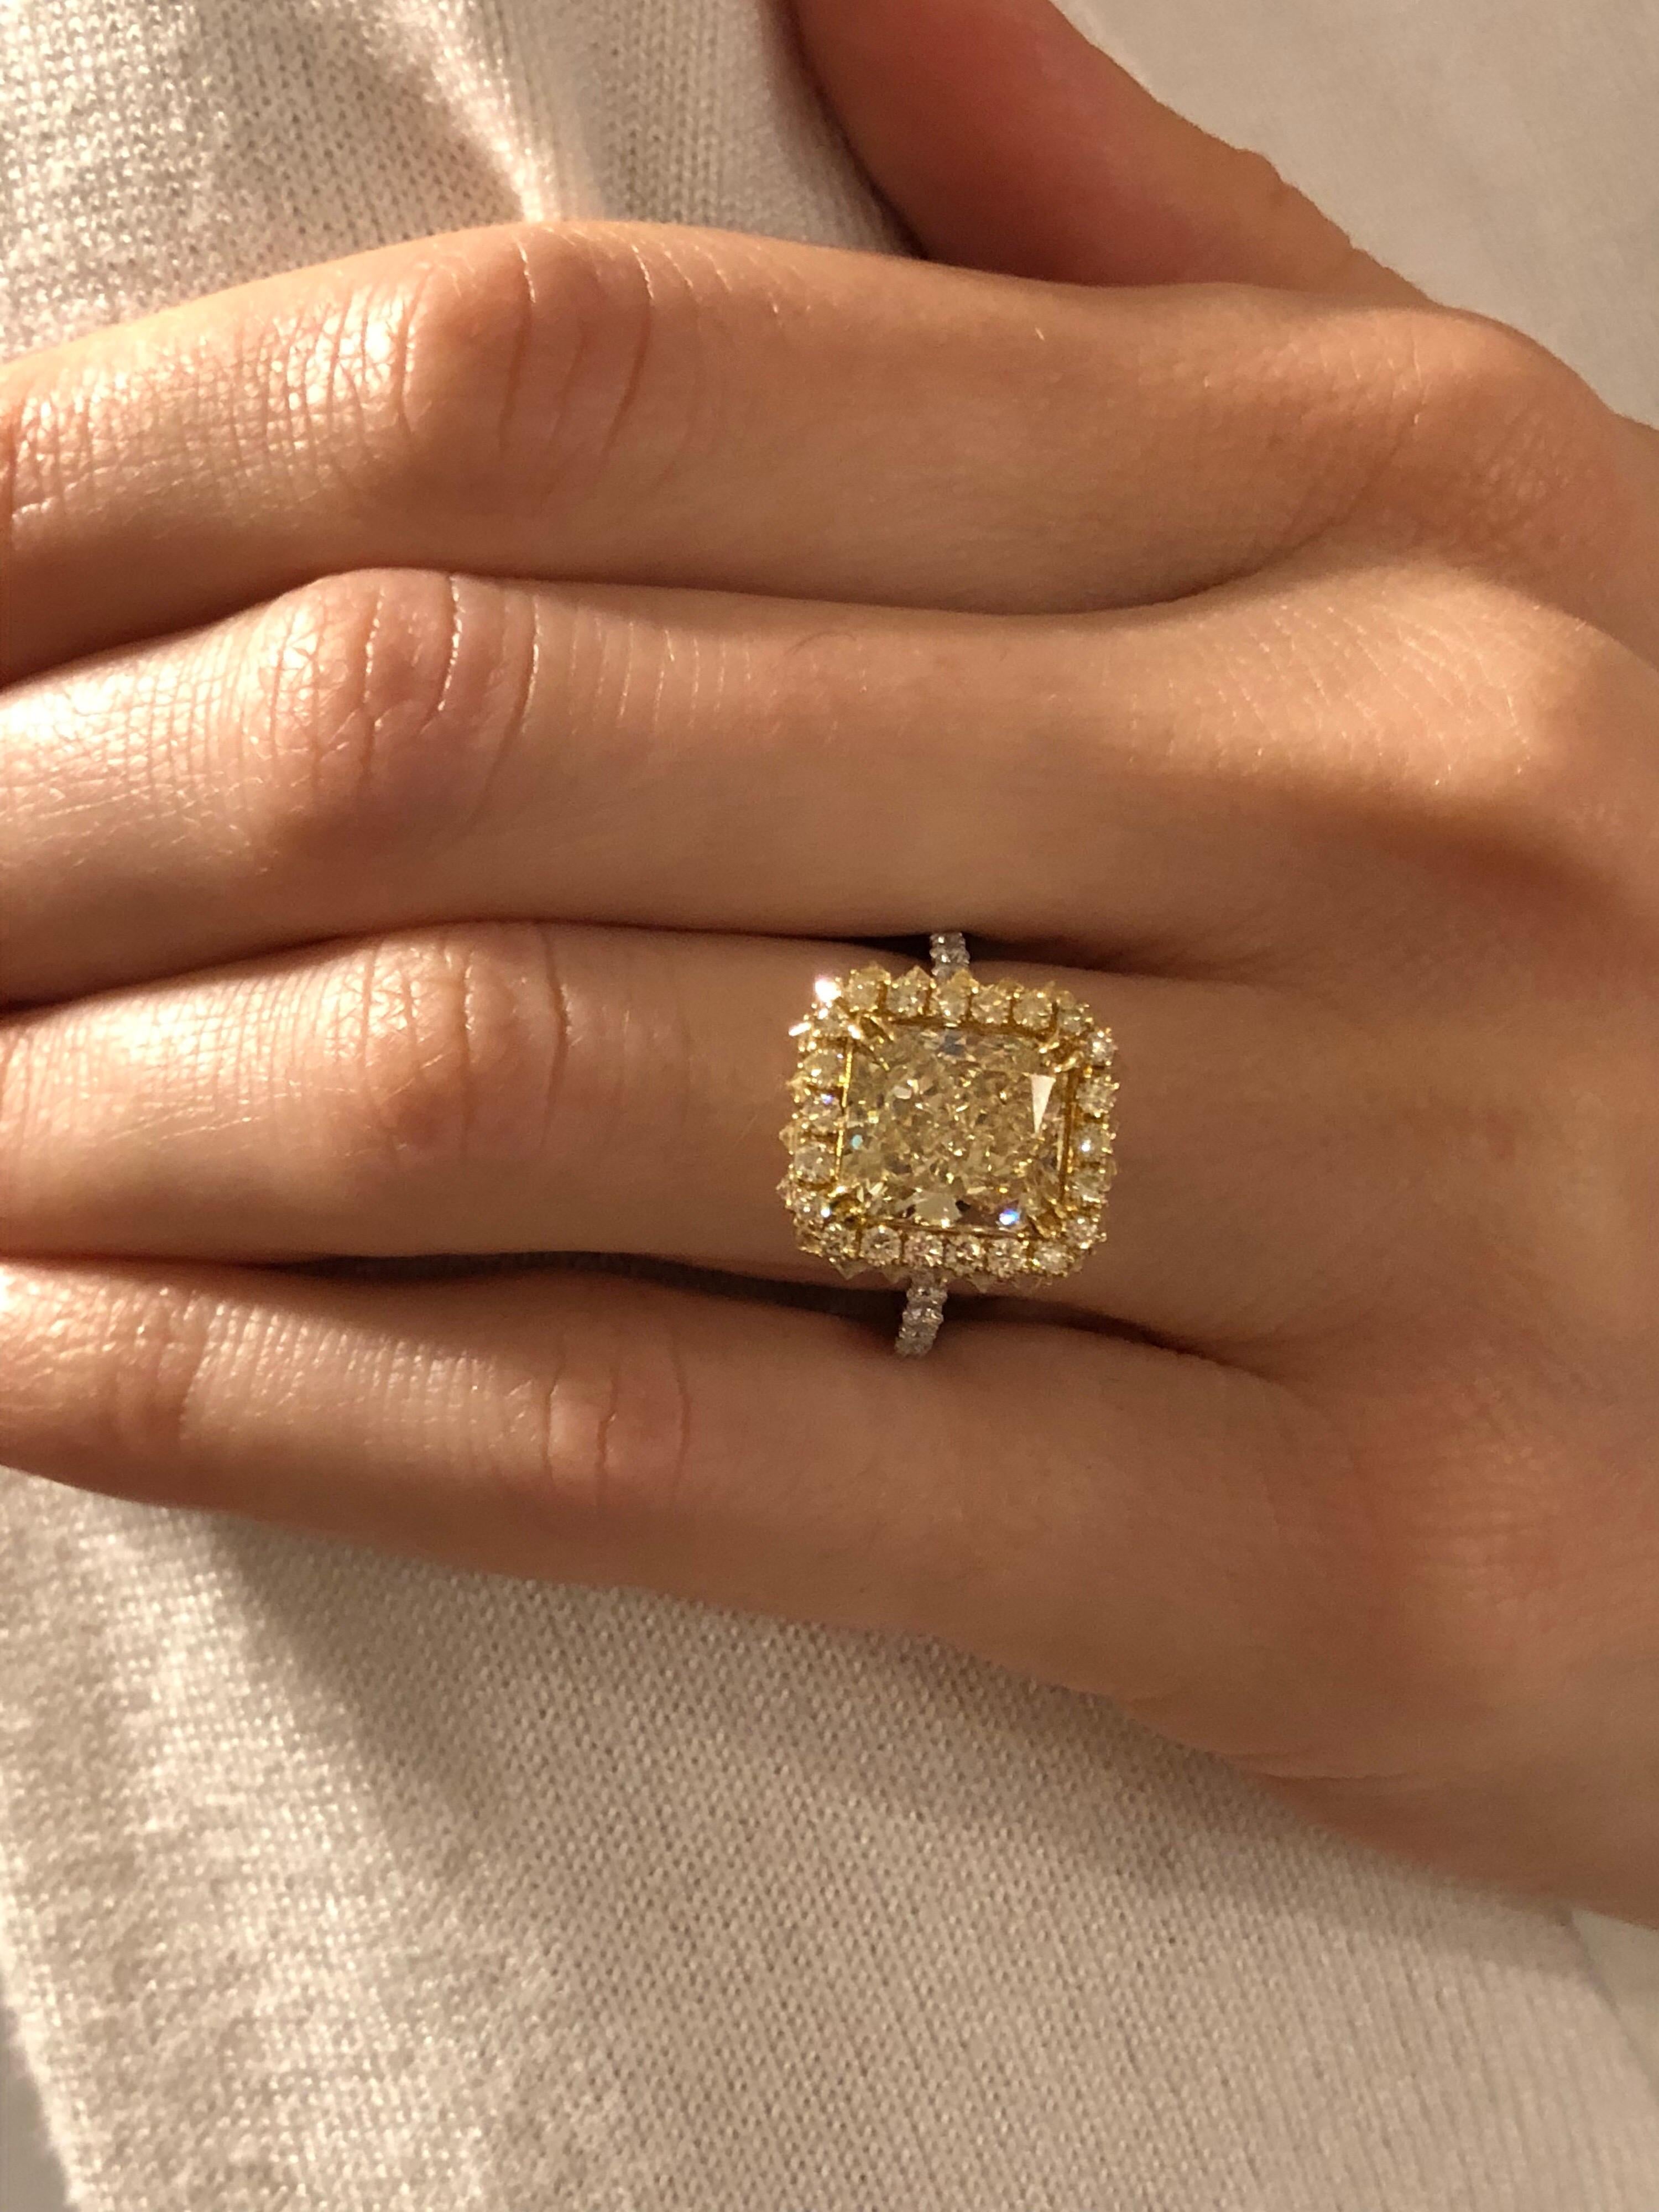 Fancy Light Yellow Diamond Ring 3.78 Carat Radiant Cut GIA Certified For Sale 3